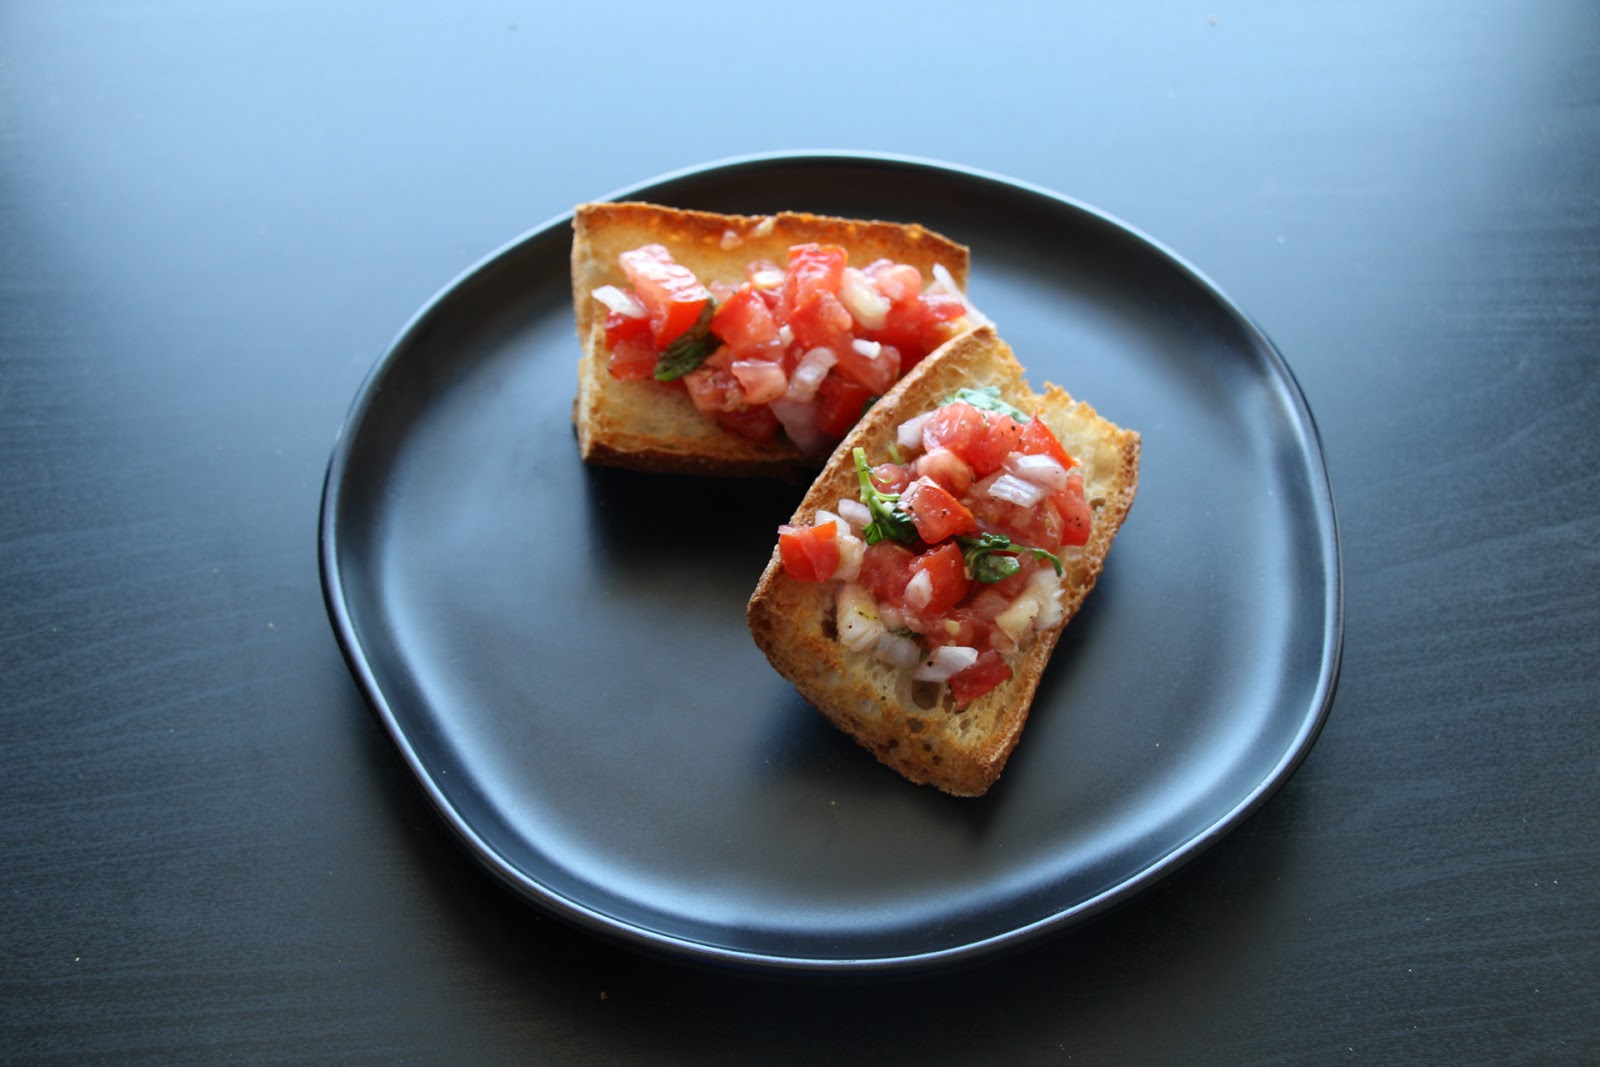 Two pieces of bruschetta on a black plate, each topped with diced tomatoes, onions, fresh basil, and a drizzle of olive oil on toasted bread slices.